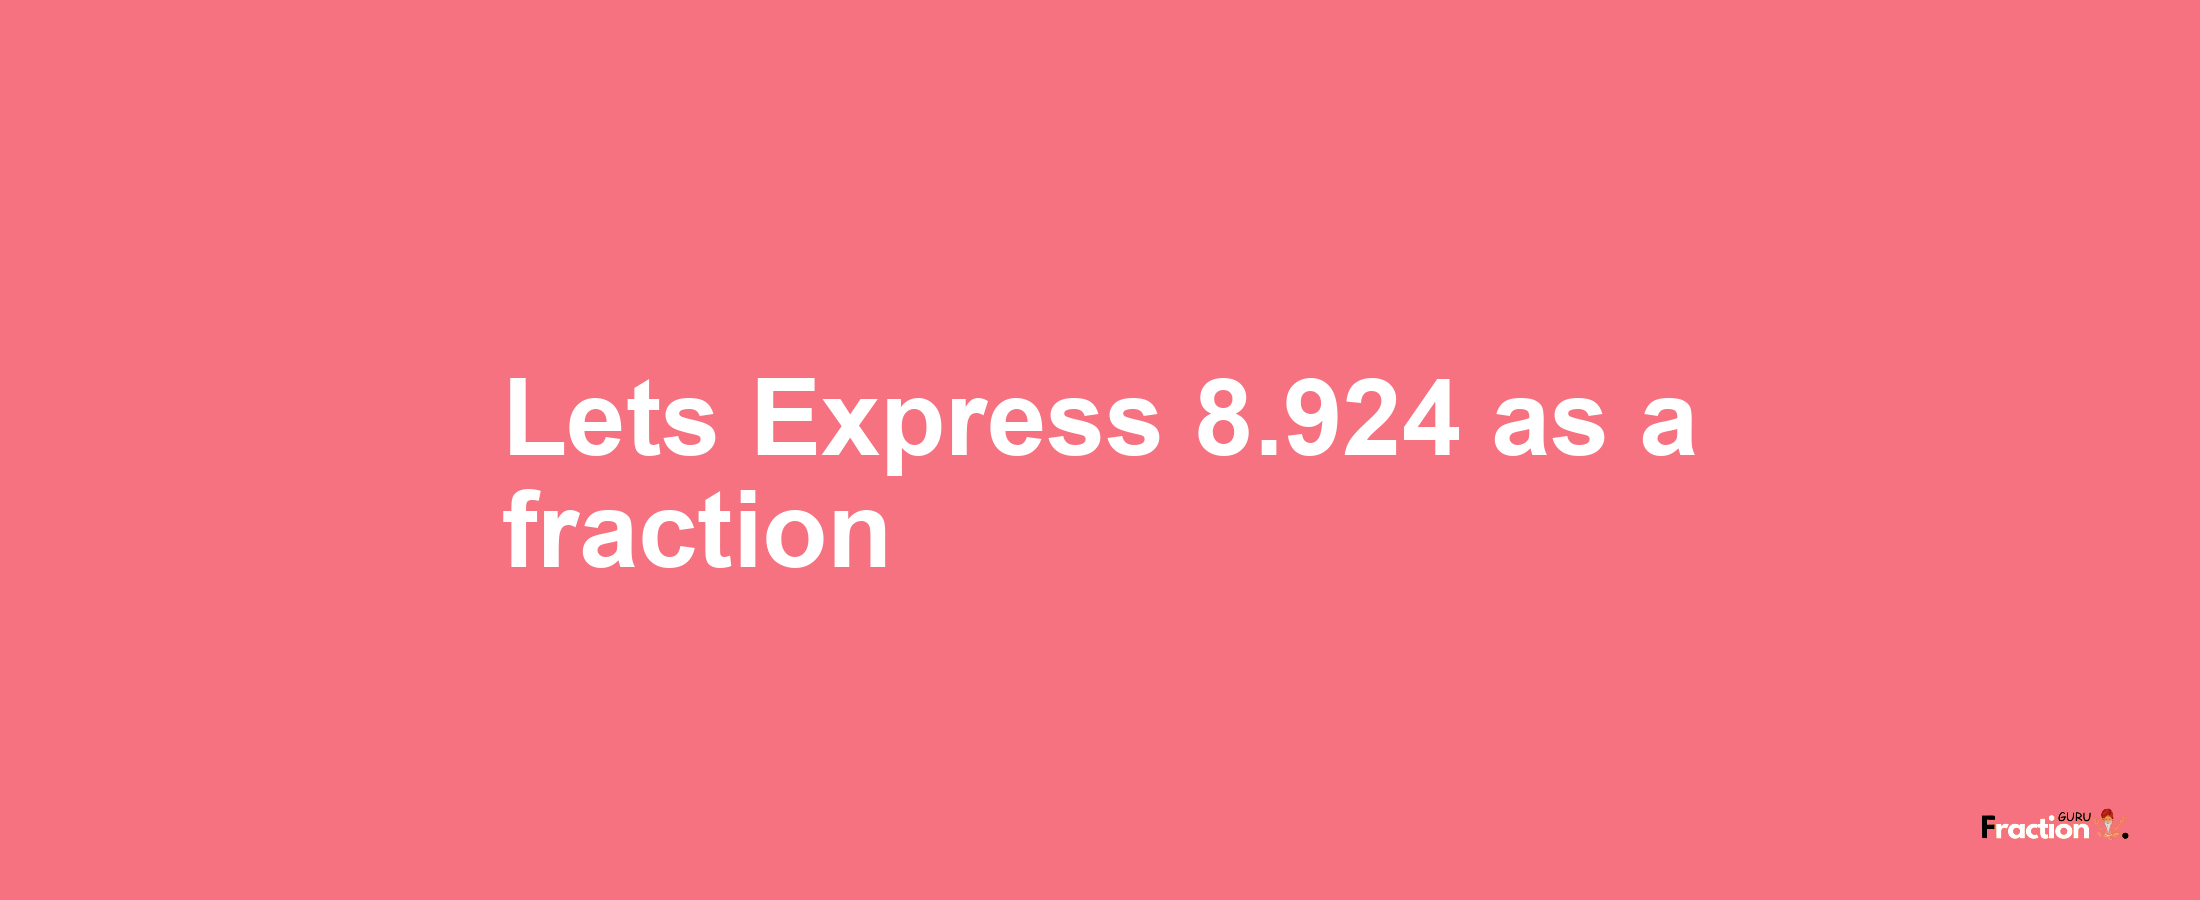 Lets Express 8.924 as afraction